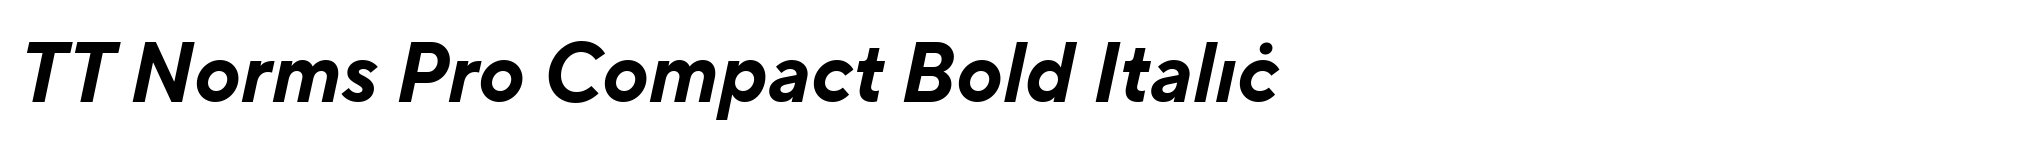 TT Norms Pro Compact Bold Italic image